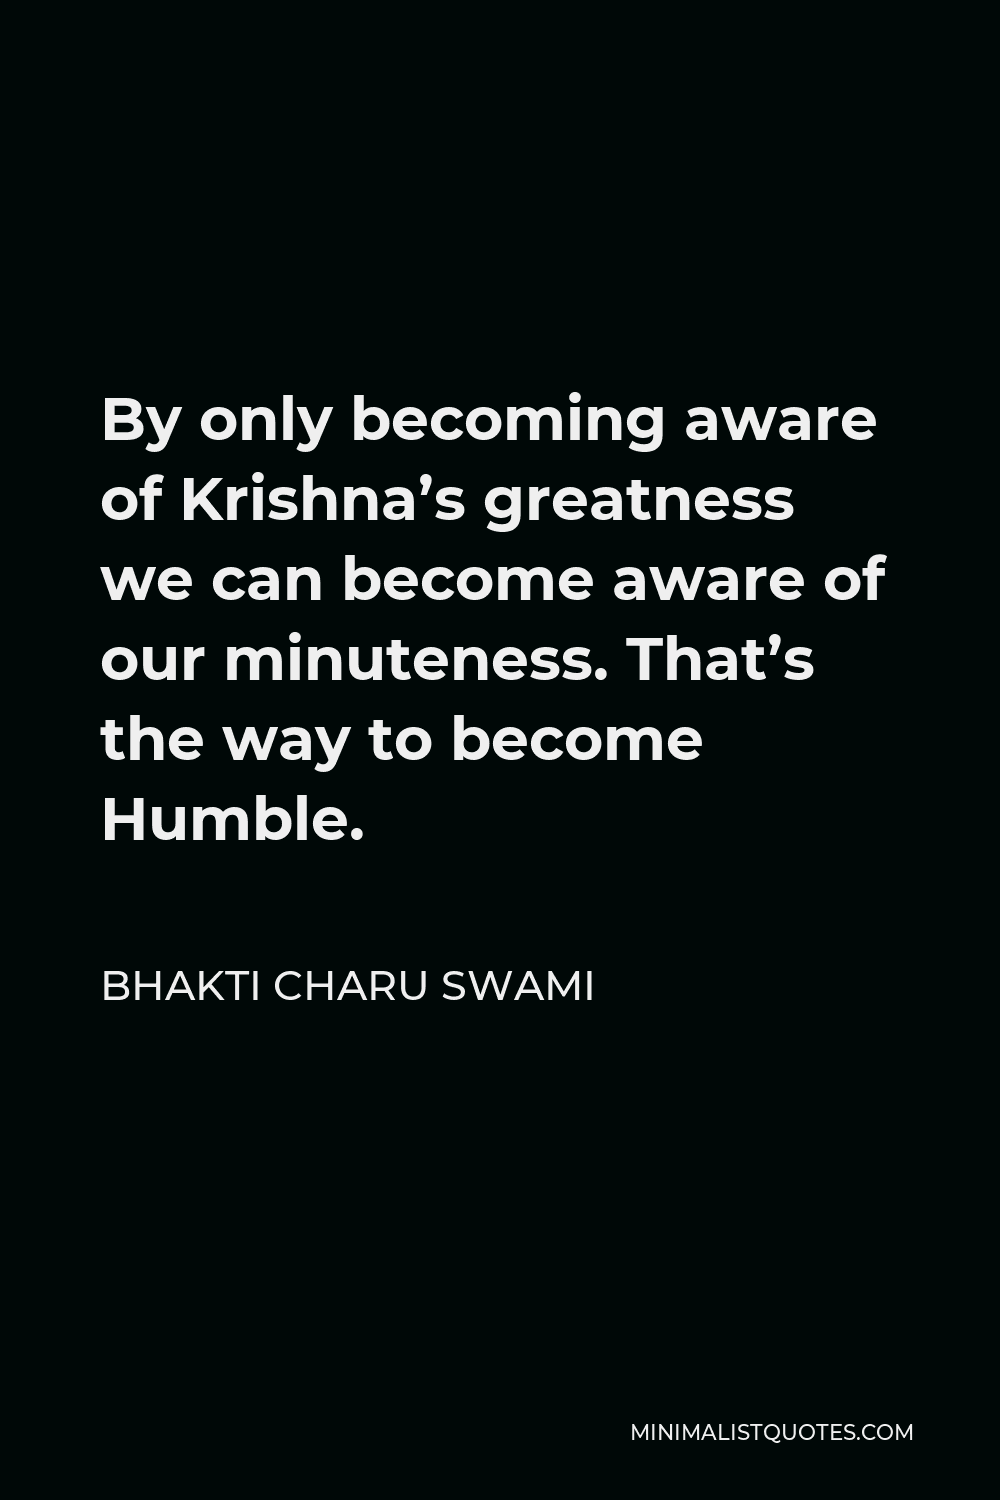 Bhakti Charu Swami Quote - By only becoming aware of Krishna’s greatness we can become aware of our minuteness. That’s the way to become Humble.